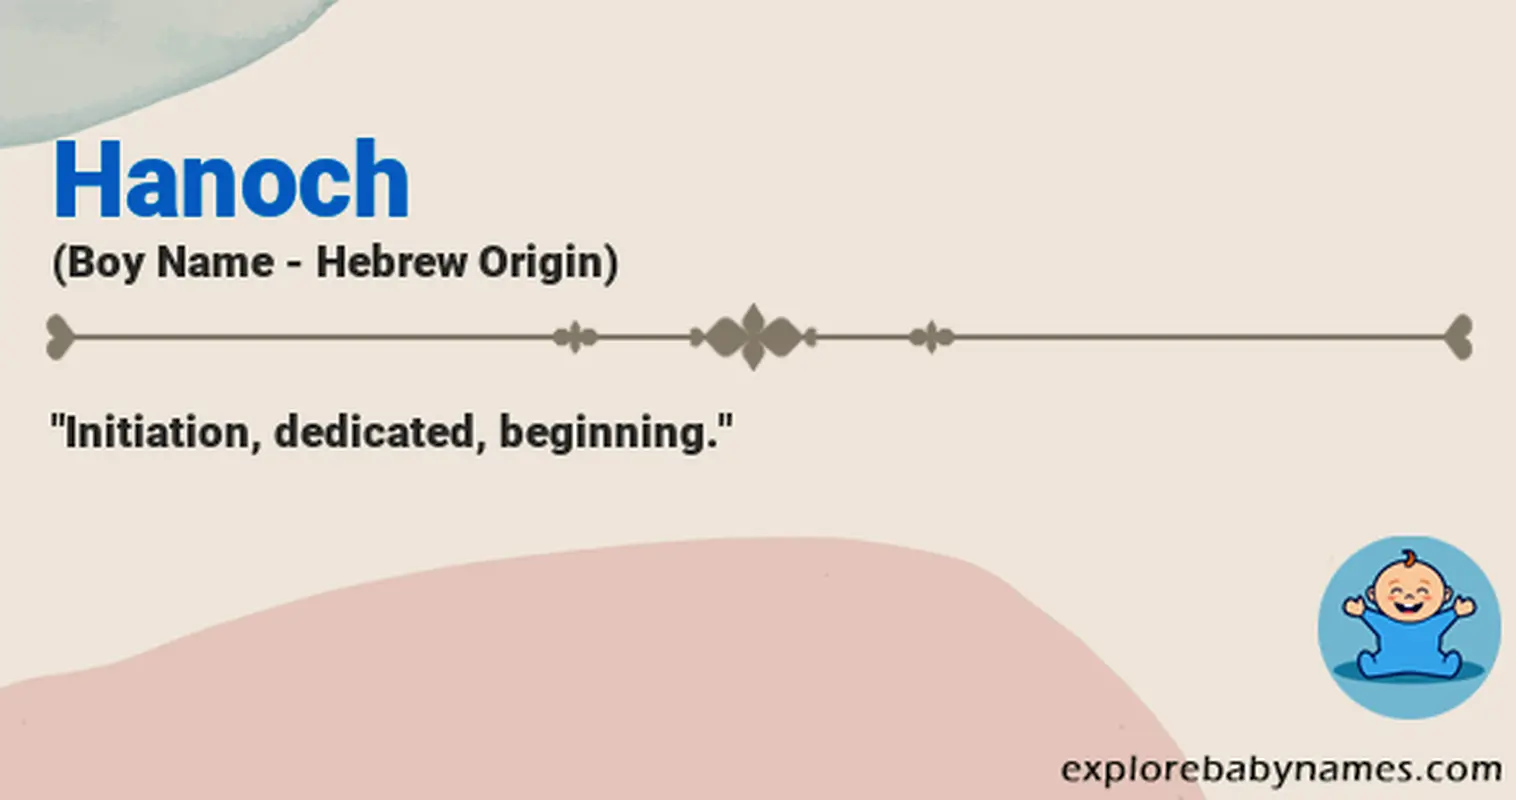 Meaning of Hanoch